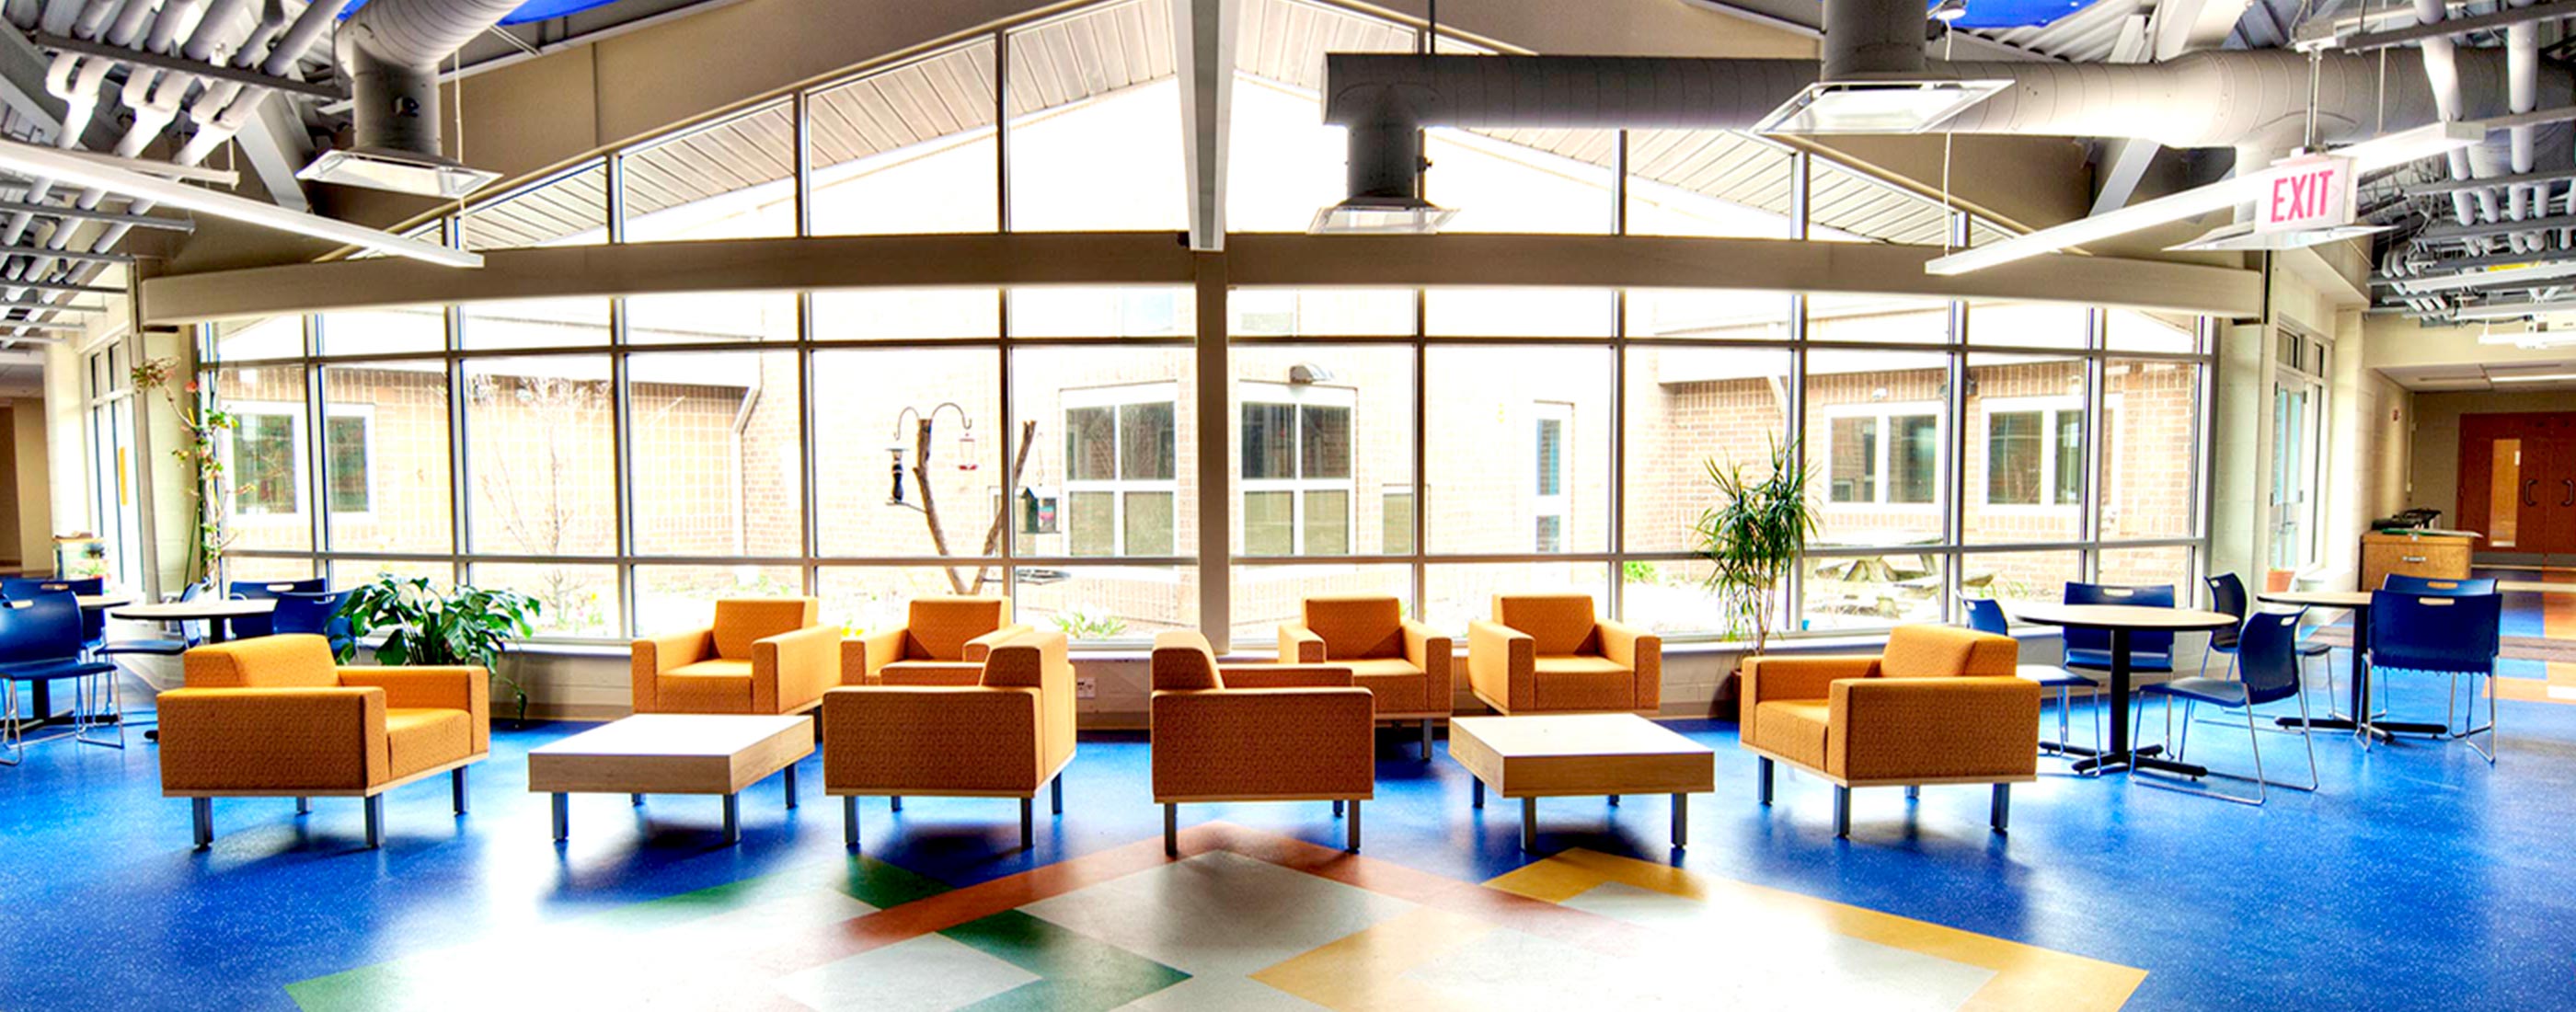 West Liberty-Salem Local School District’s shared learning spaces, designed by OHM Advisors, include bright windows.